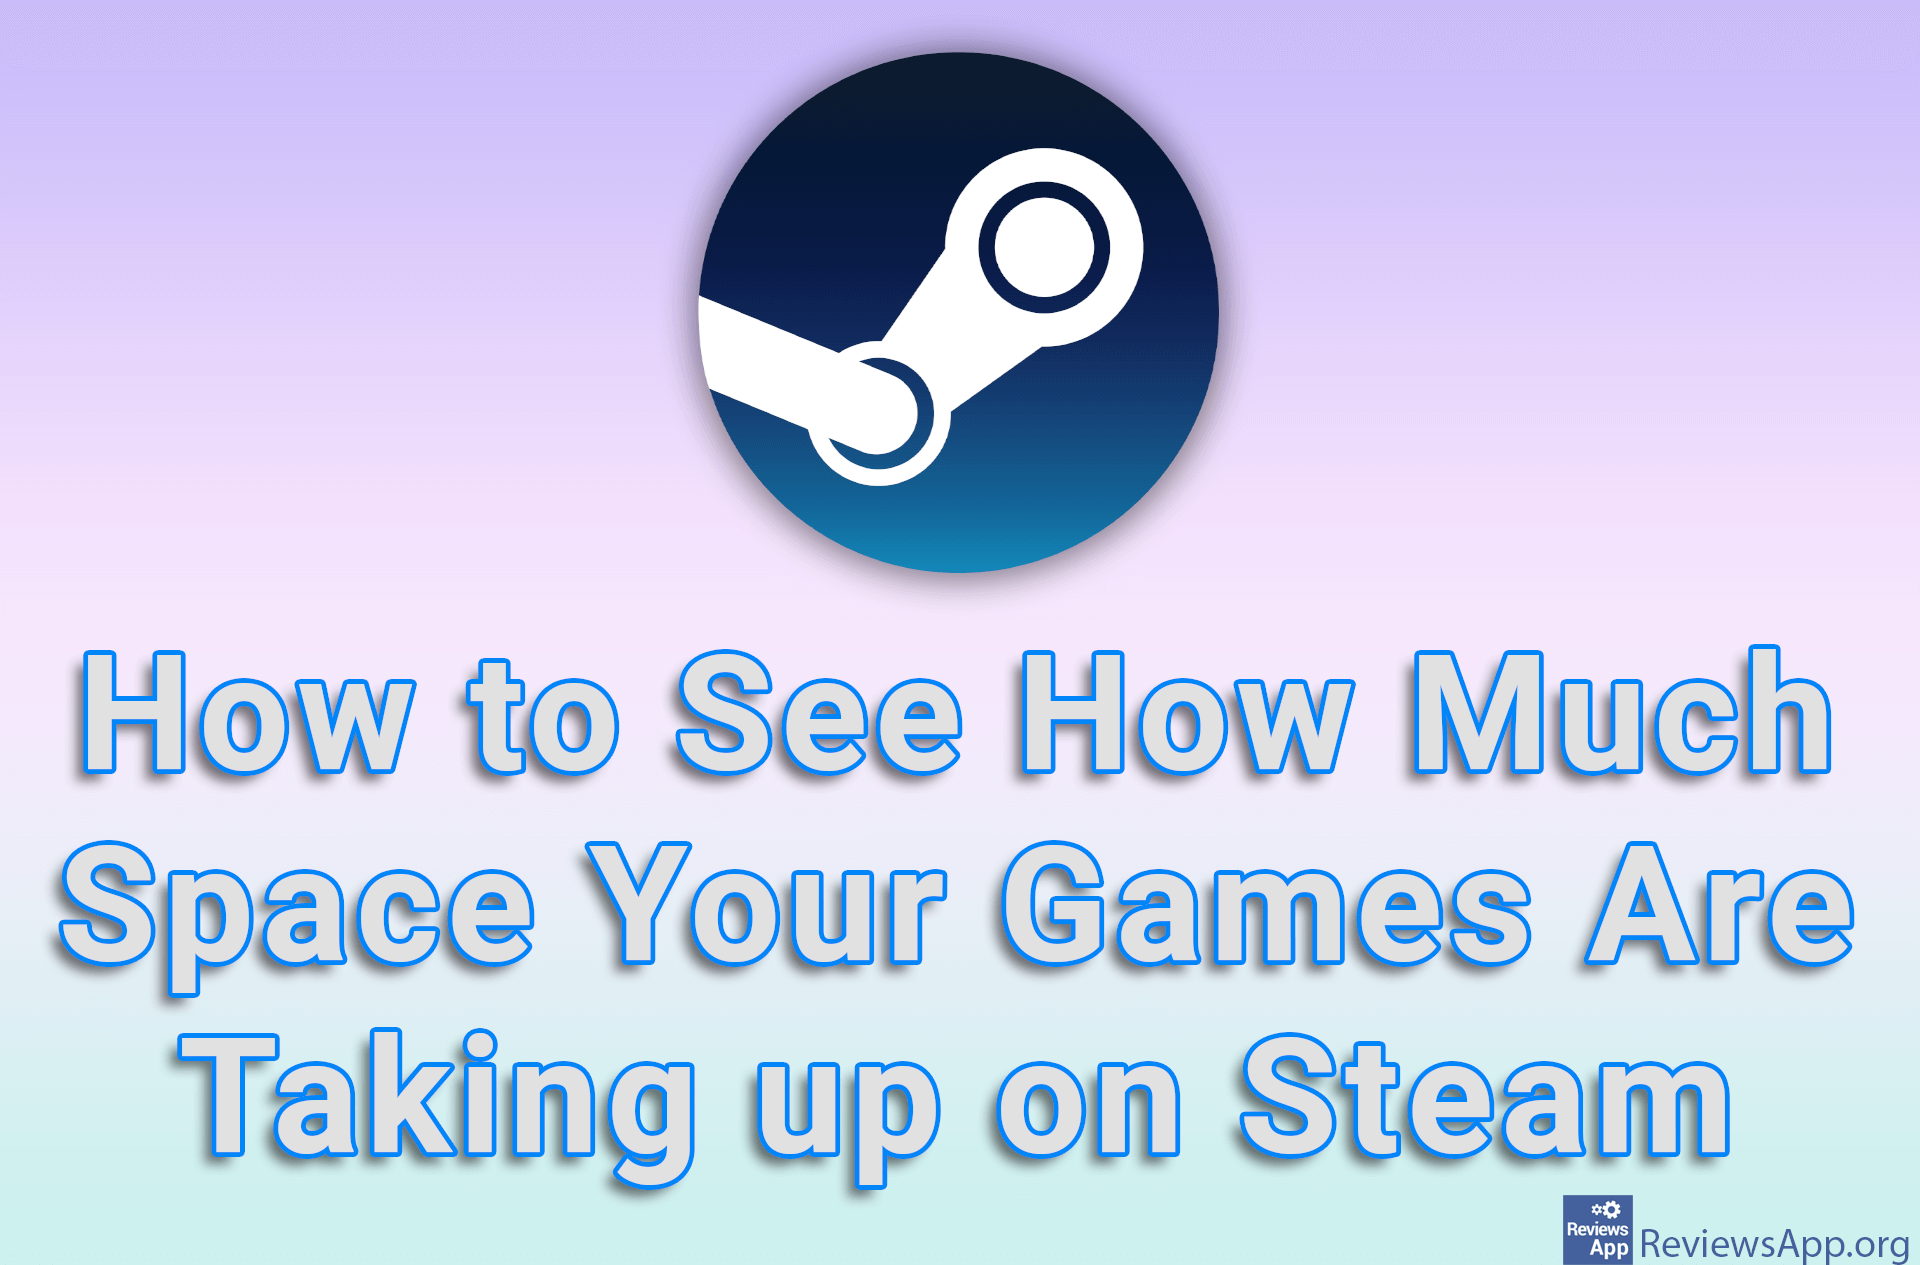 How to See How Much Space Your Games Are Taking up on Steam